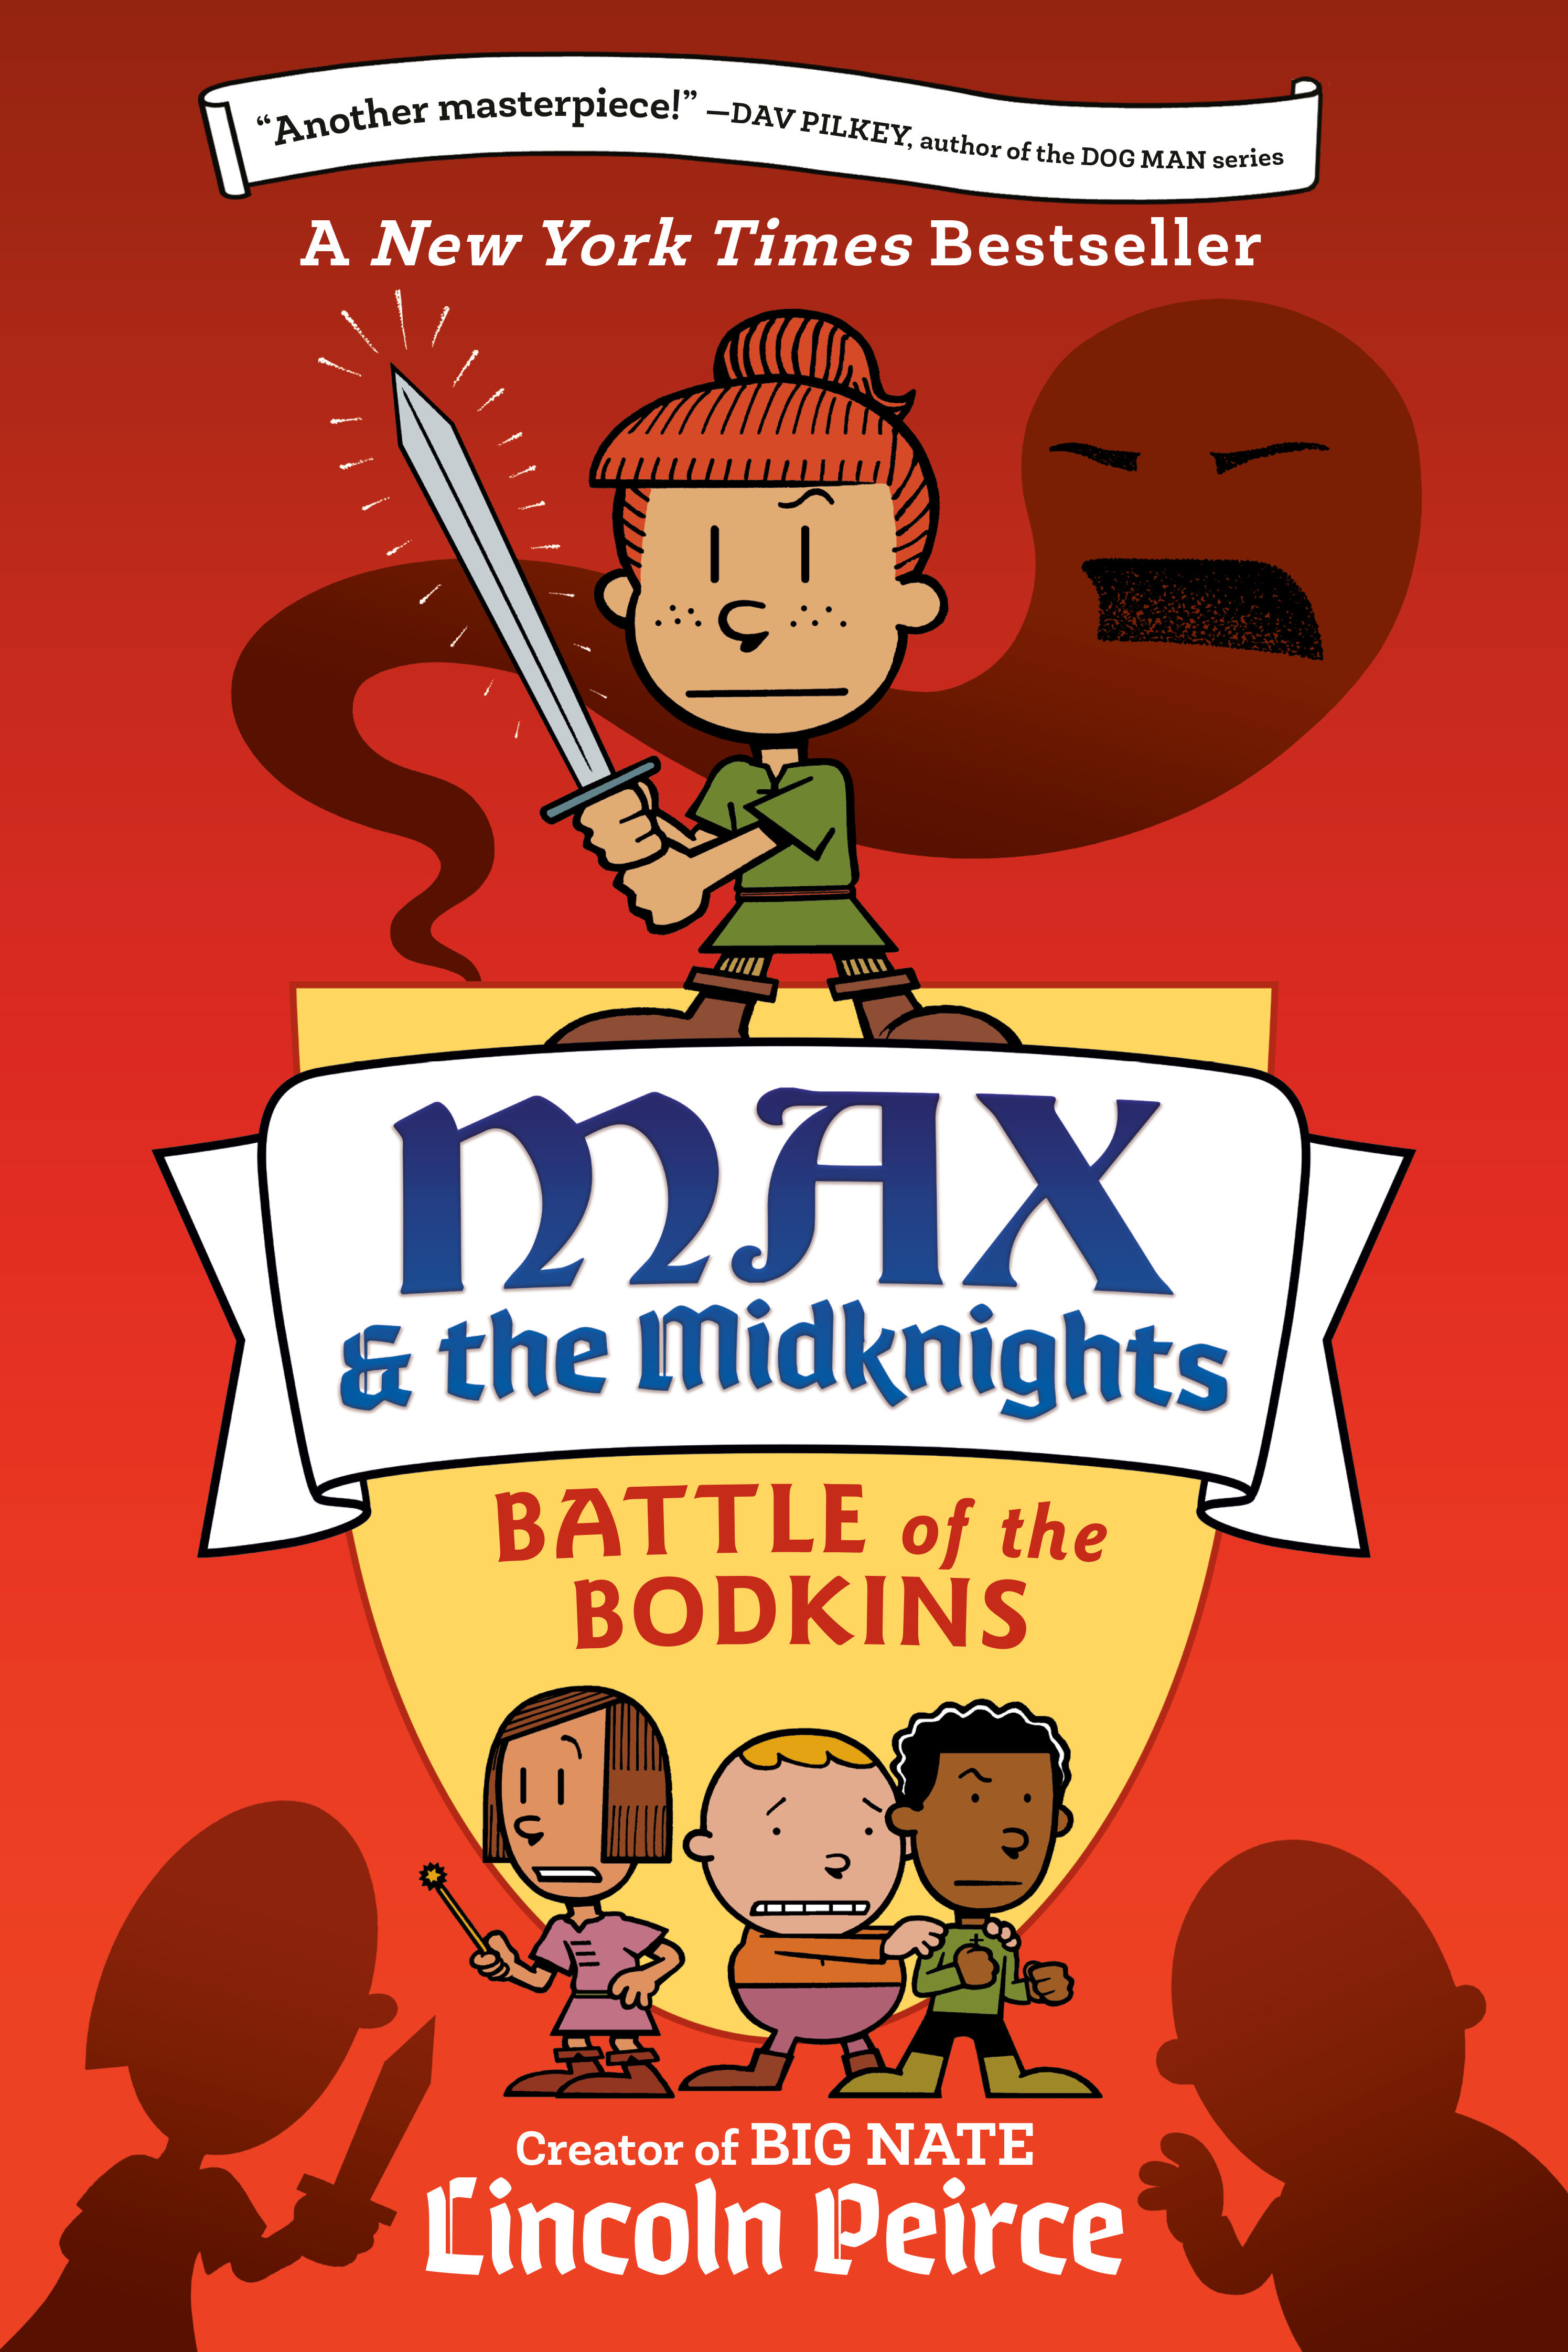 Max and the Midknights Illustrated Young Adult Novel Volume 2 Battle of Bodkins